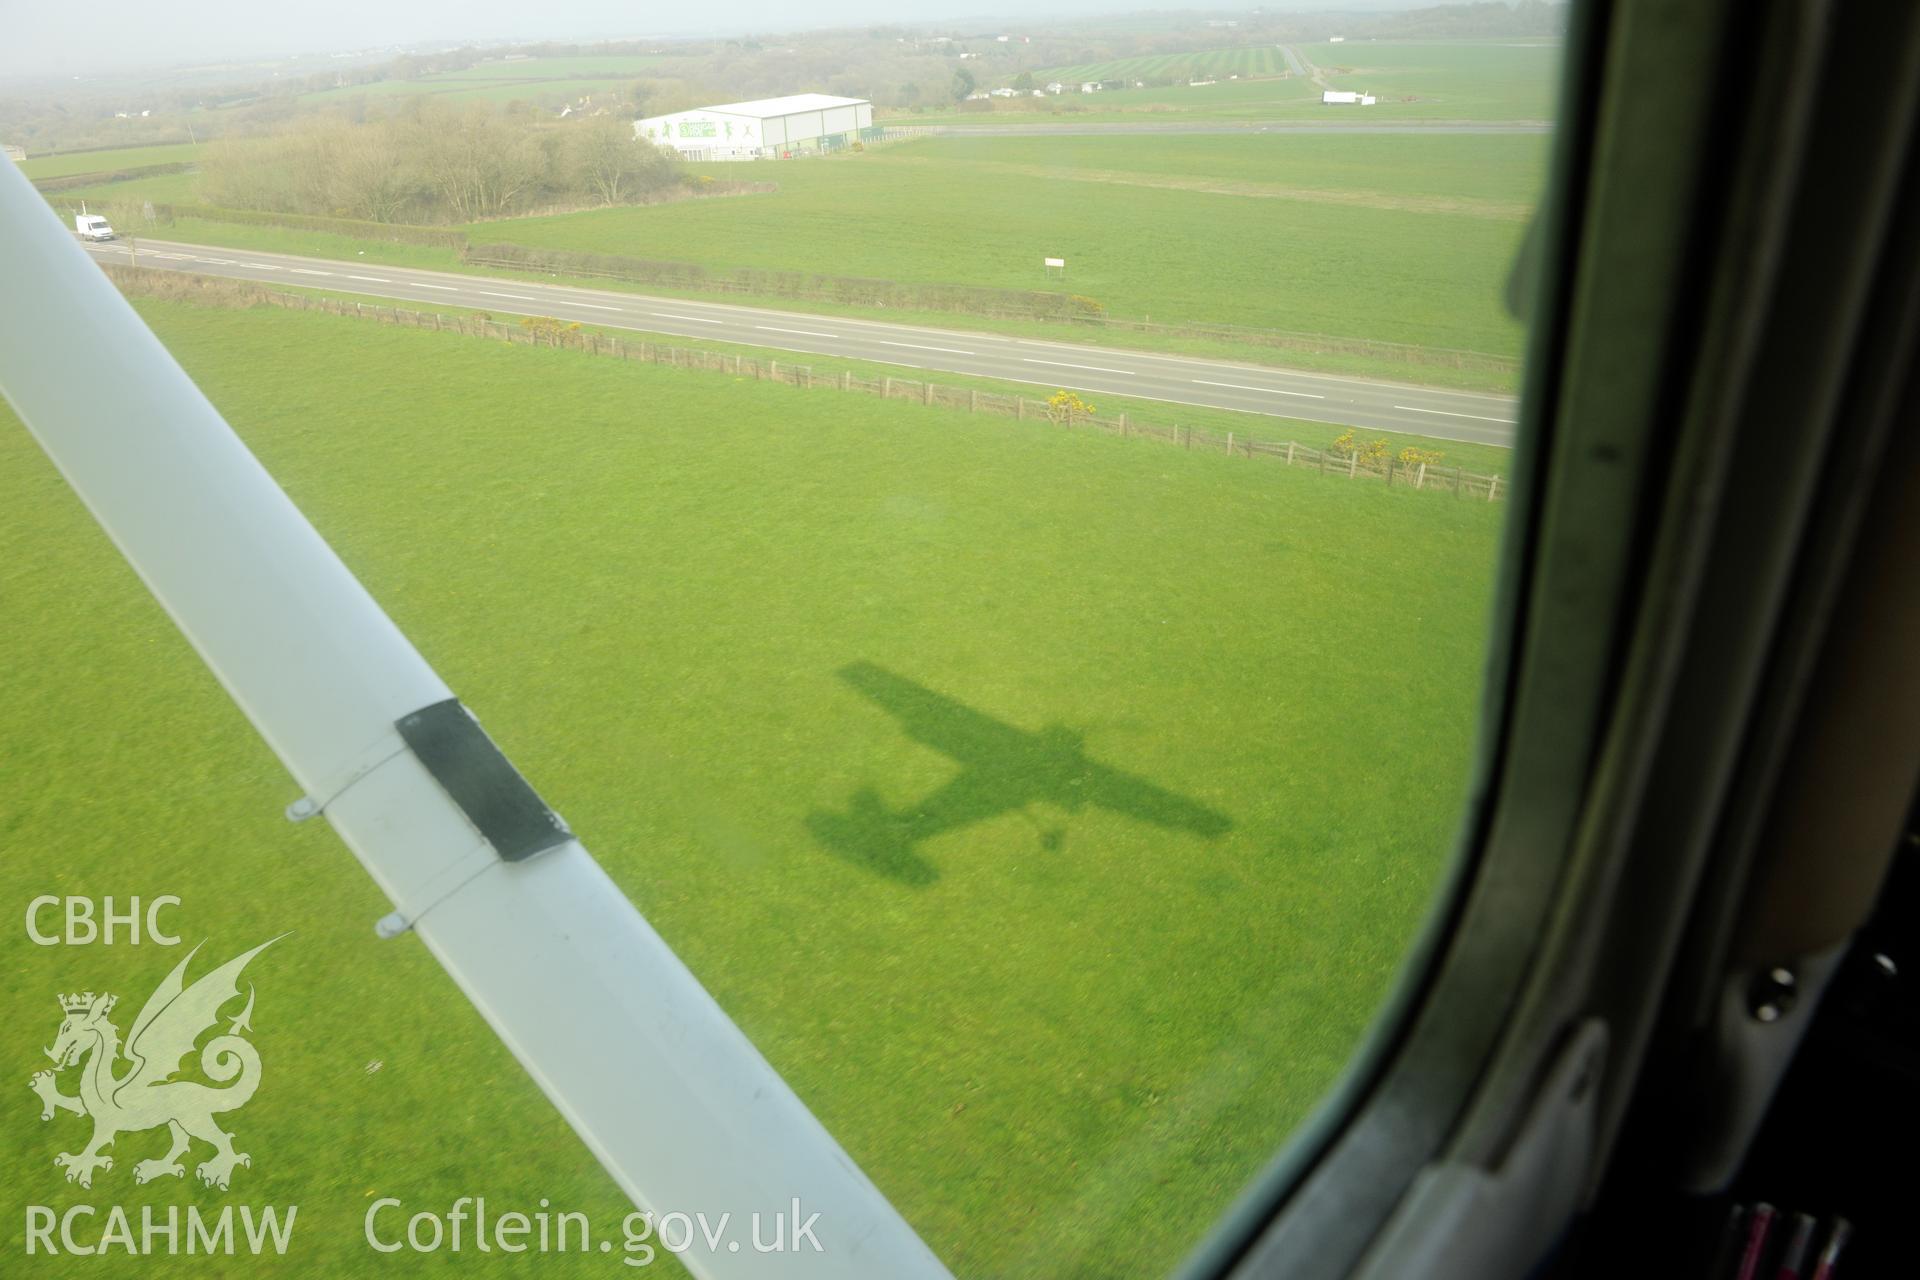 Aerial photography of the final approach to Haverfordwest Airport taken on 27th March 2017. Baseline aerial reconnaissance survey for the CHERISH Project. ? Crown: CHERISH PROJECT 2017. Produced with EU funds through the Ireland Wales Co-operation Programme 2014-2020. All material made freely available through the Open Government Licence.